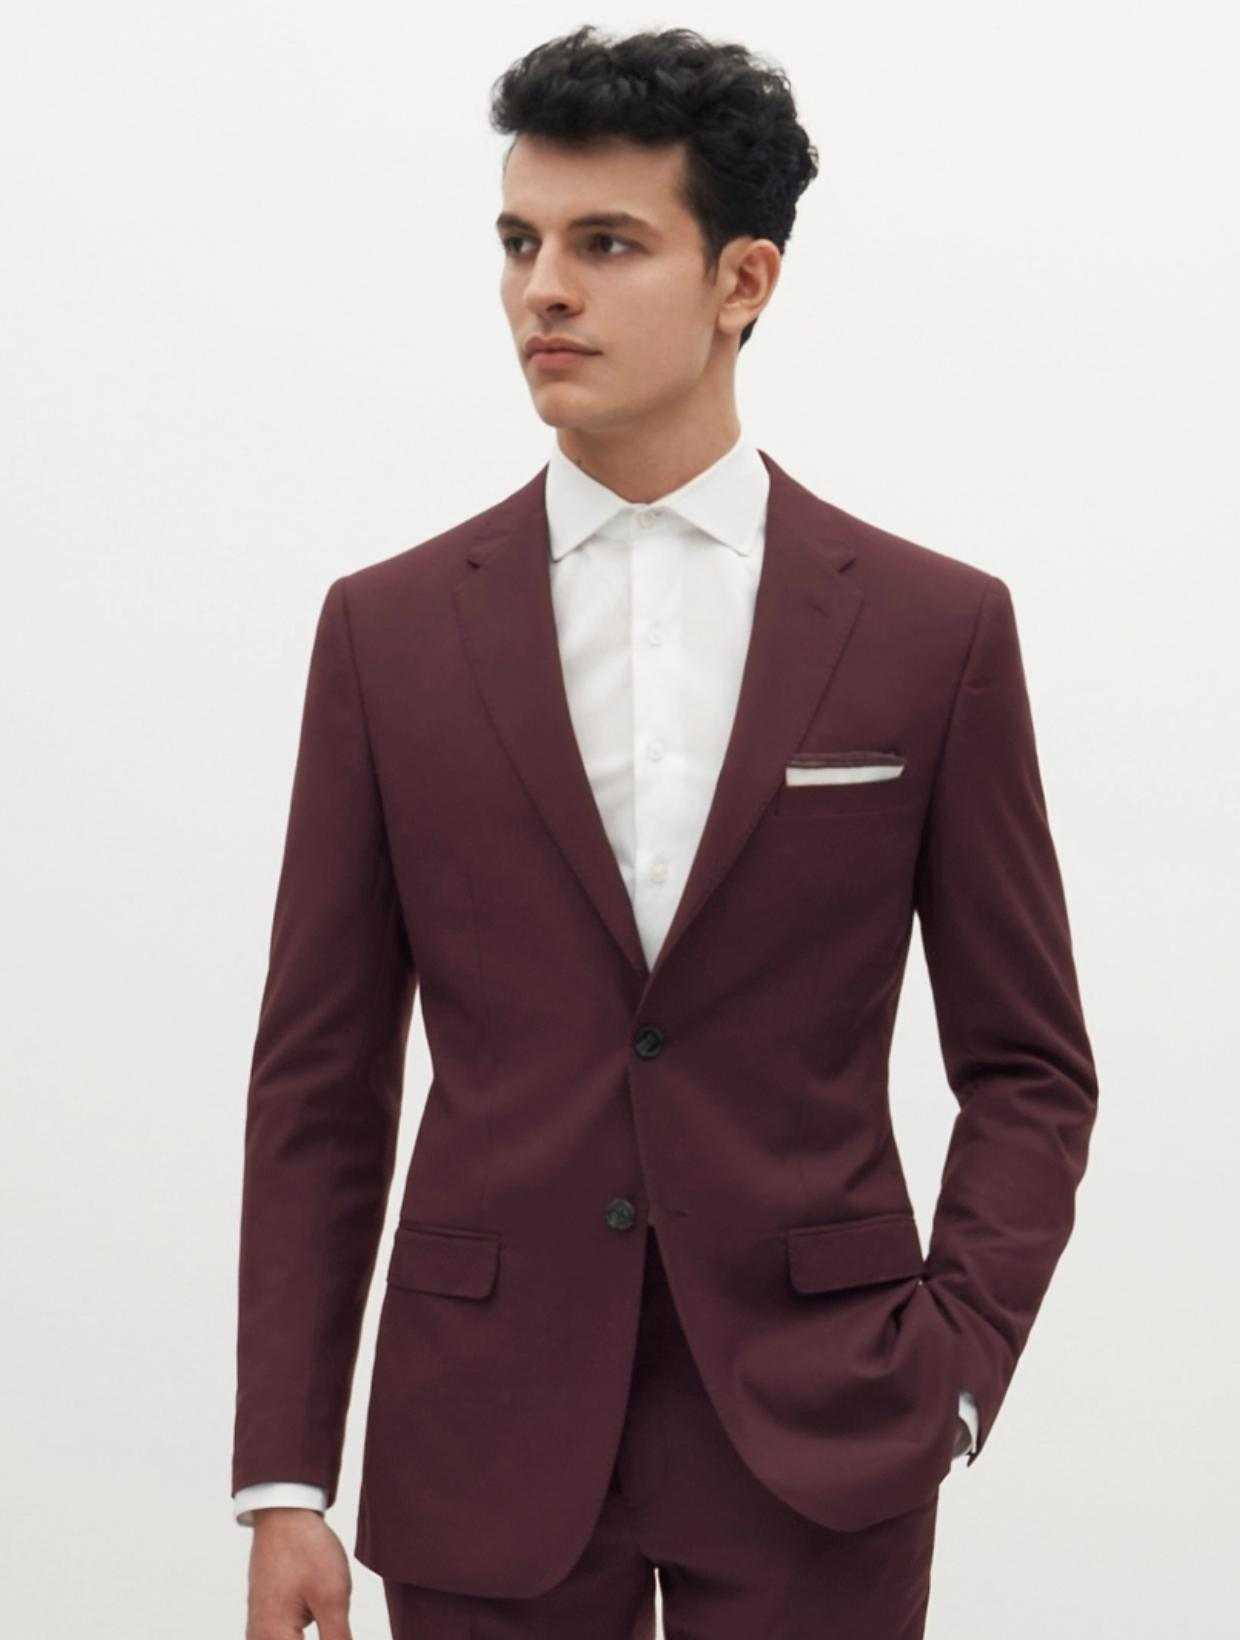 Men's maroon suit shopping photo to get ready for high school dance in prom suits.